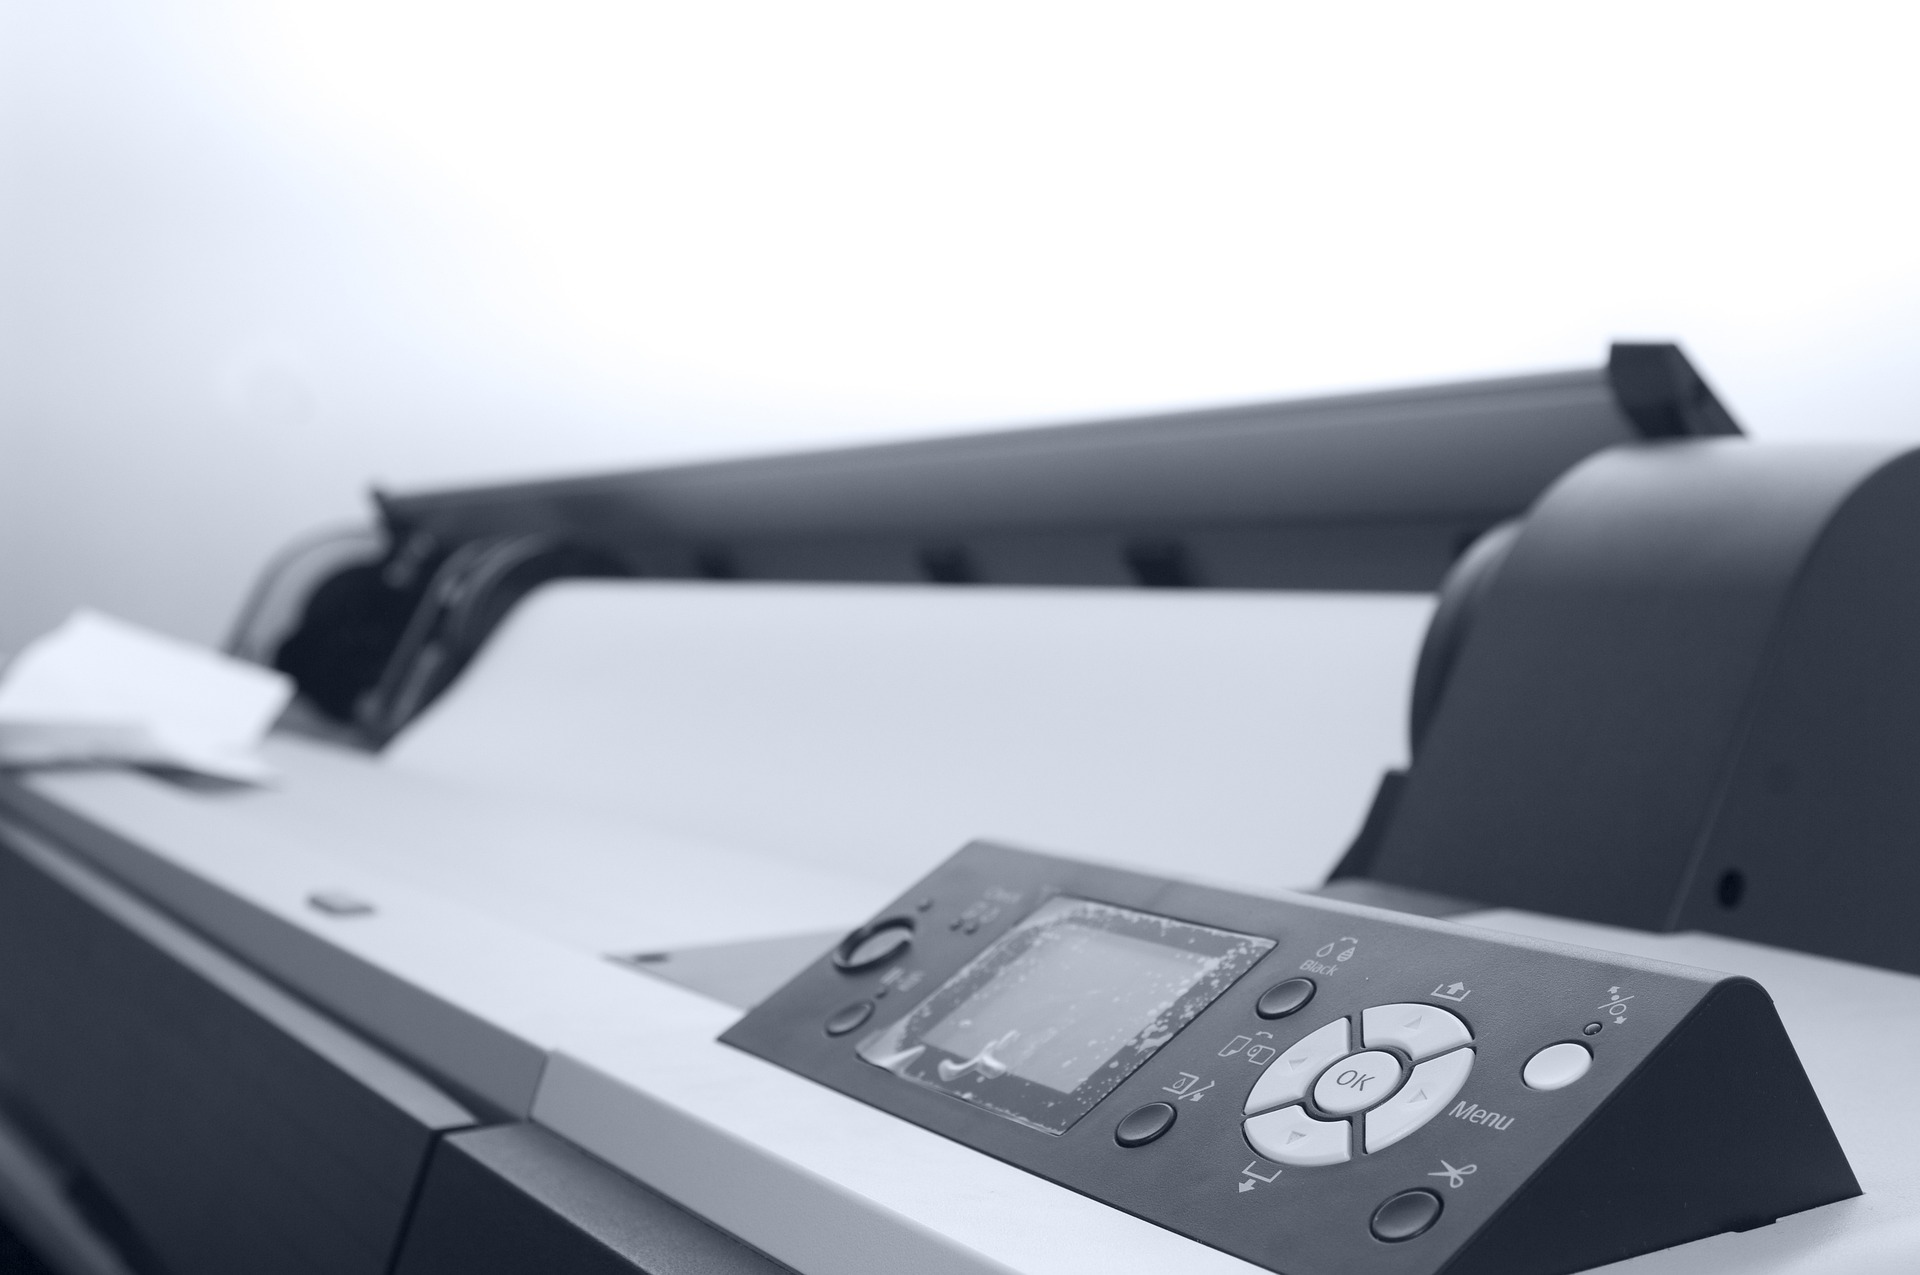 A black and white image of a large format printer